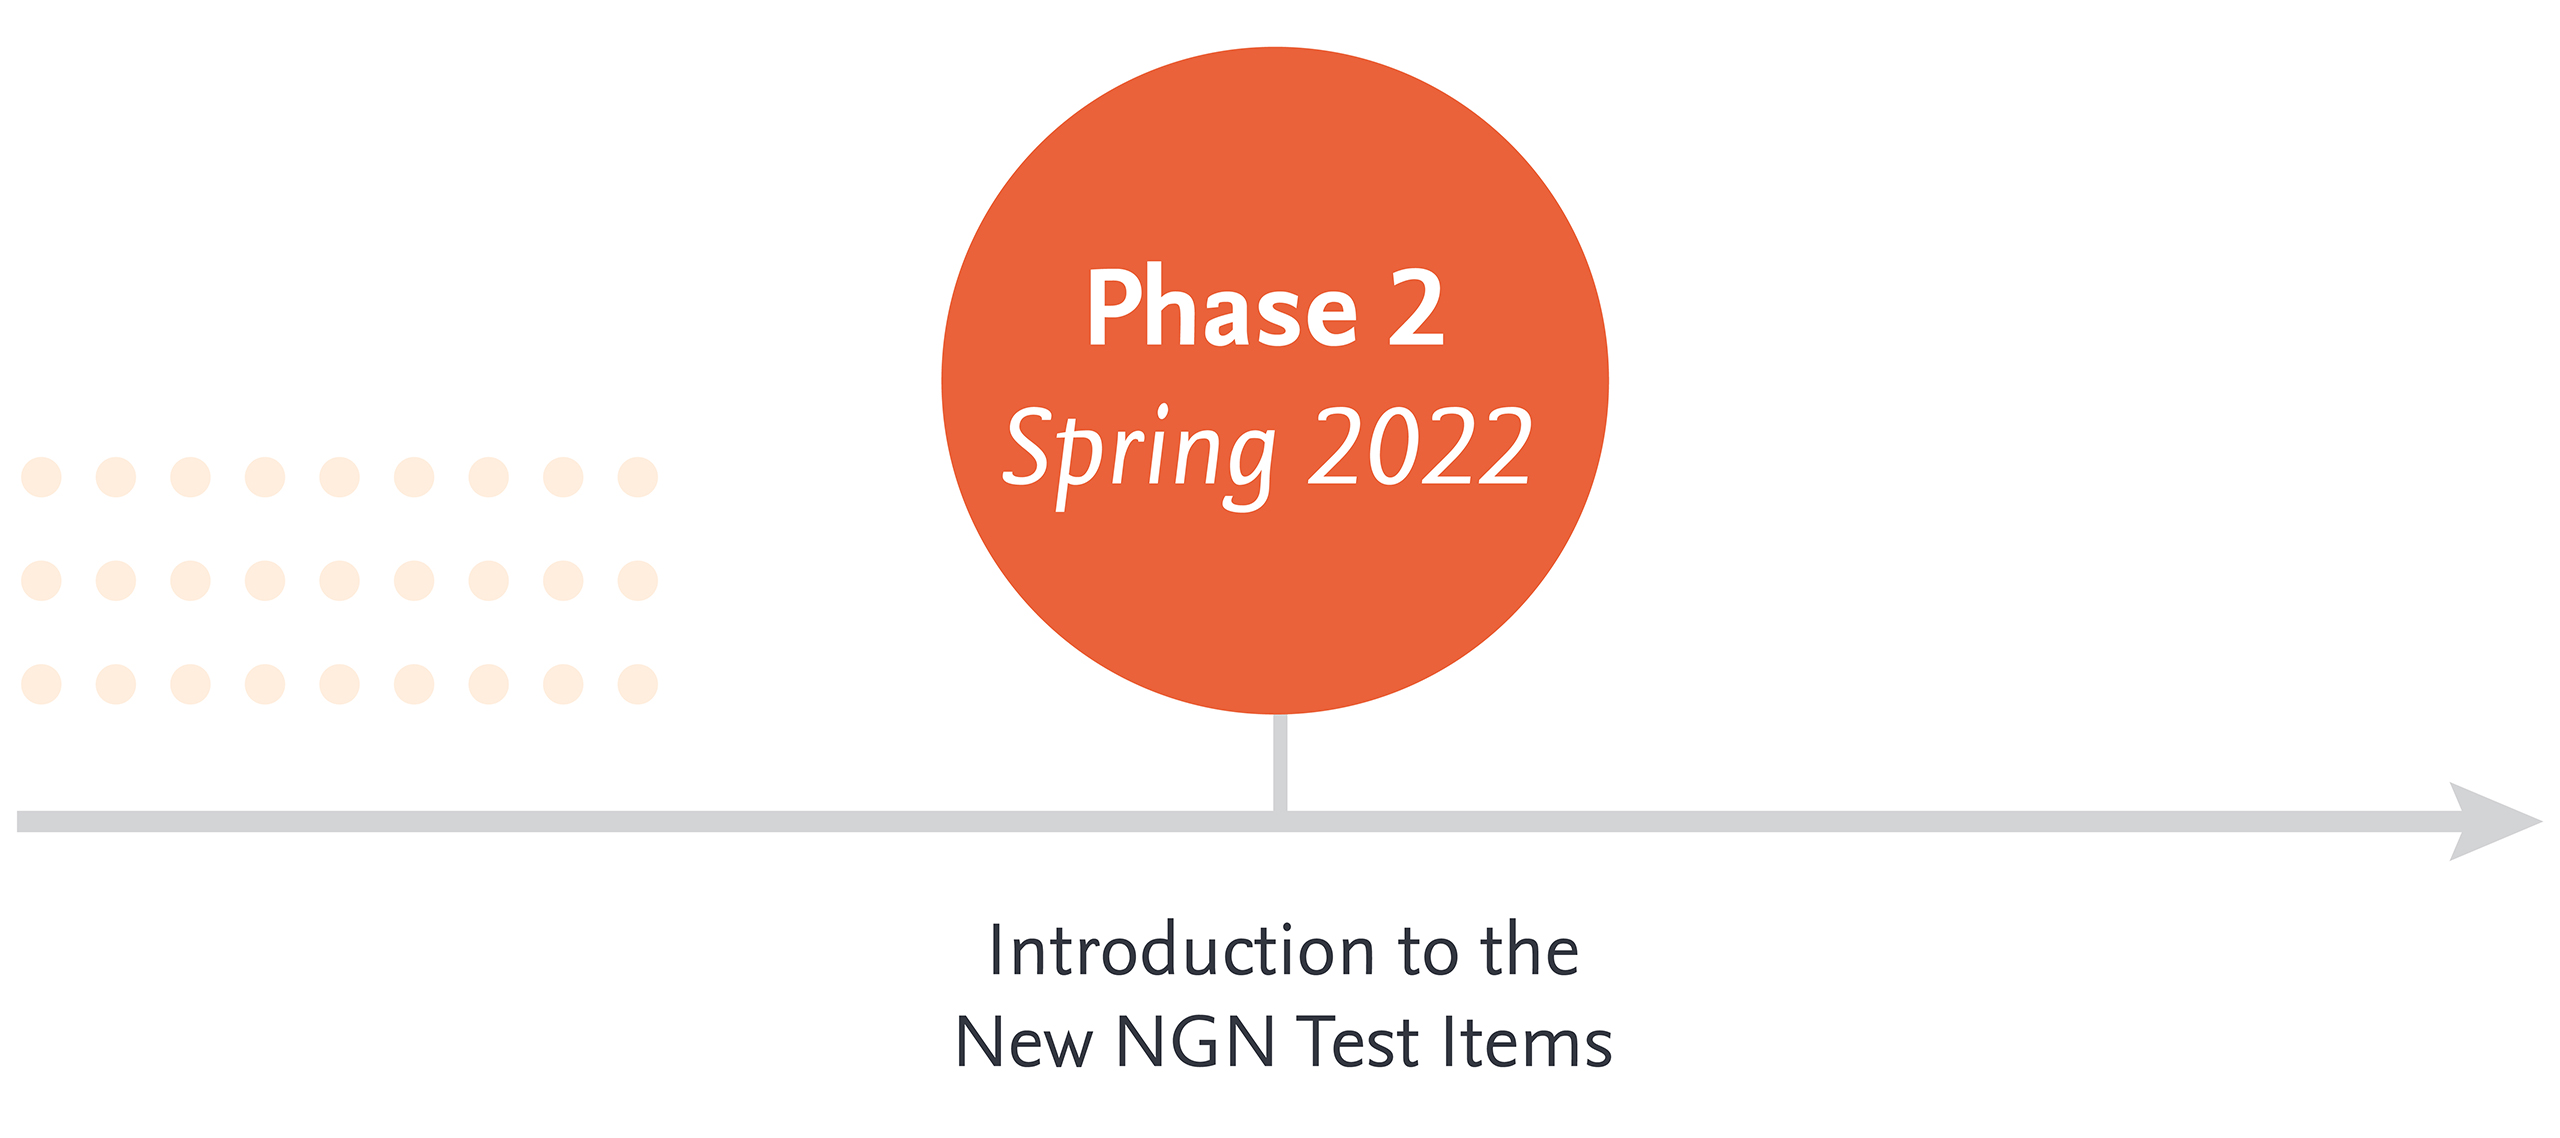 phase 2: introduction to new ngn test items